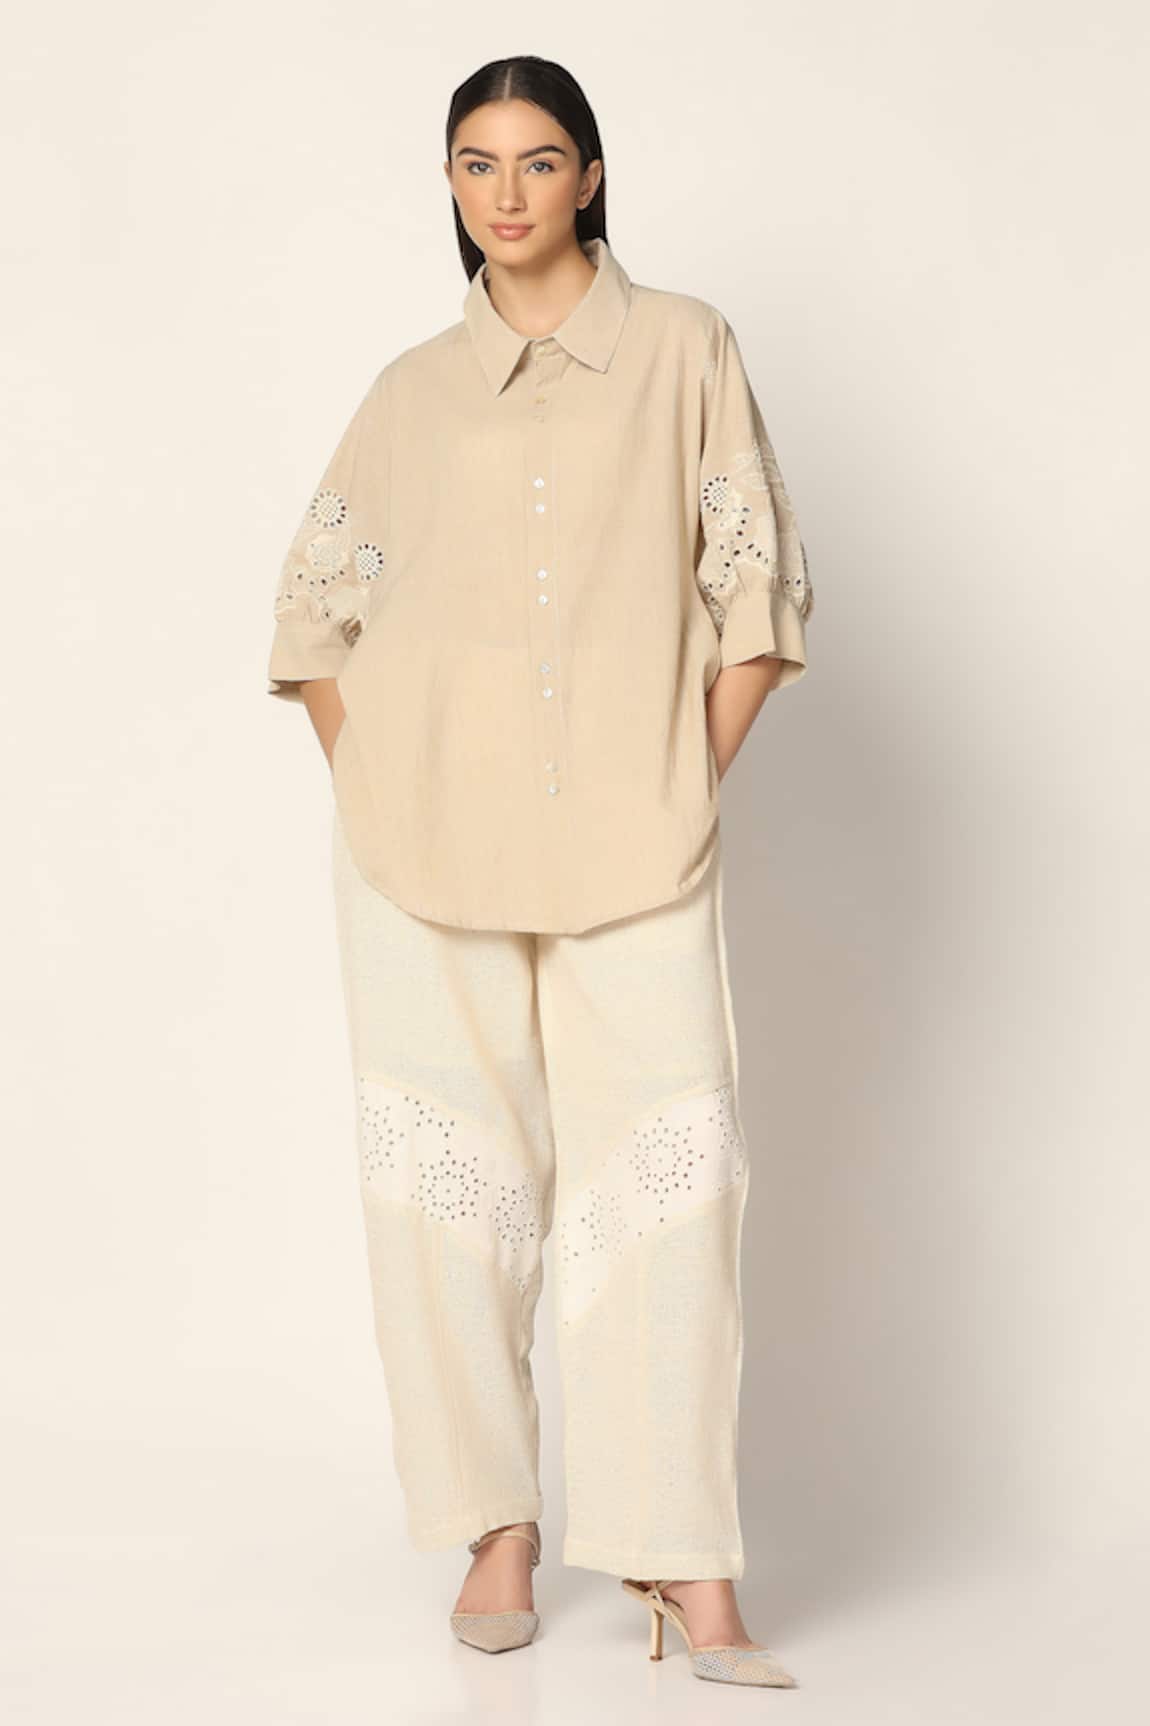 Two Sisters By Gyans Cotton Sleeve Embroidered Shirt